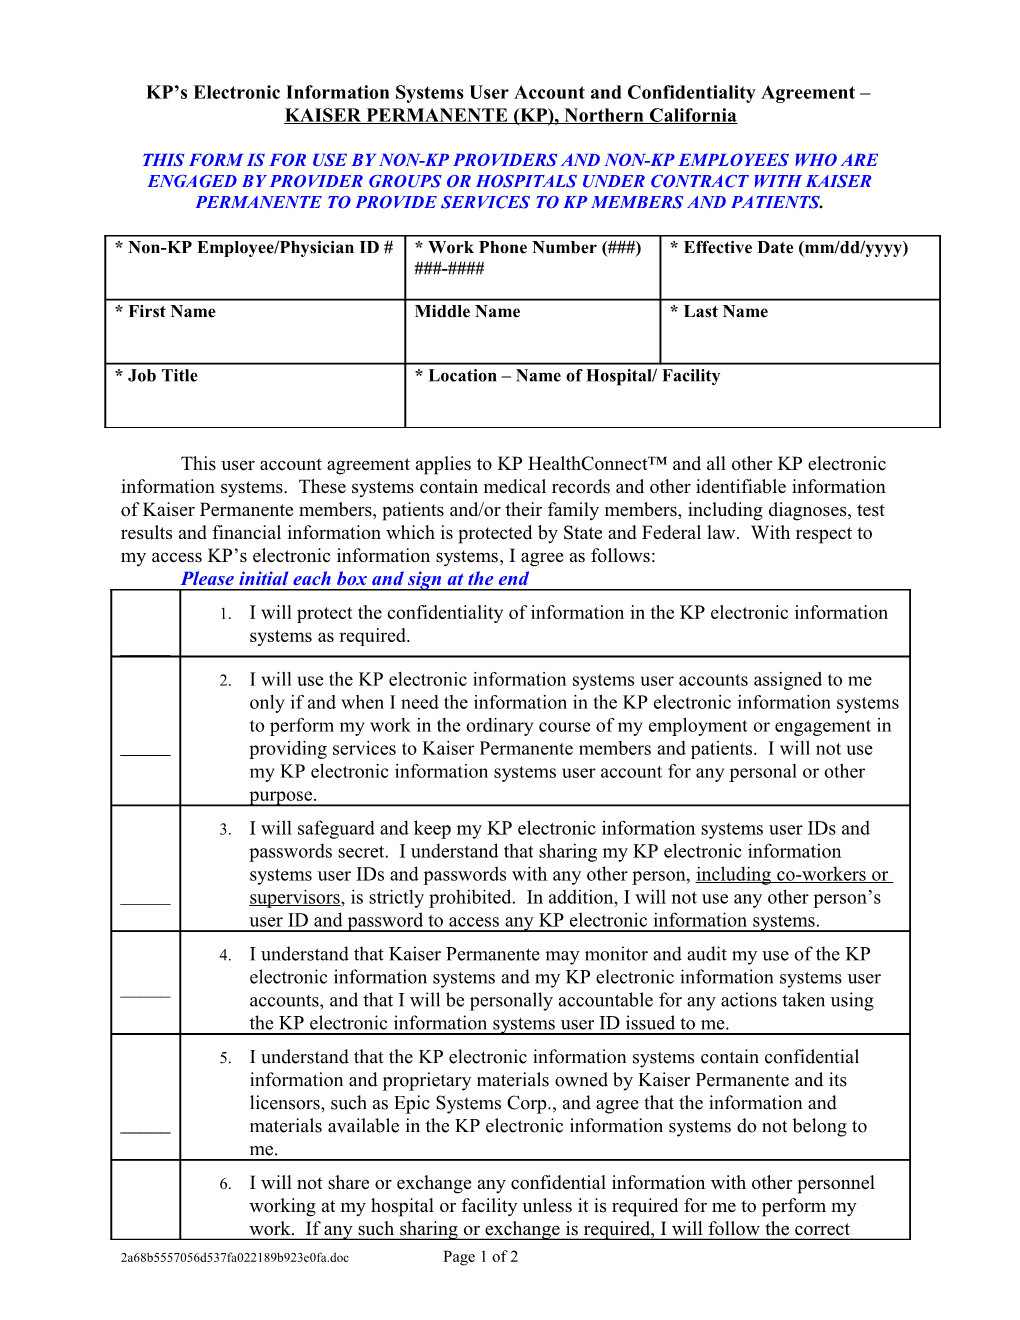 KP S Electronic Information Systems User Account and Confidentiality Agreement